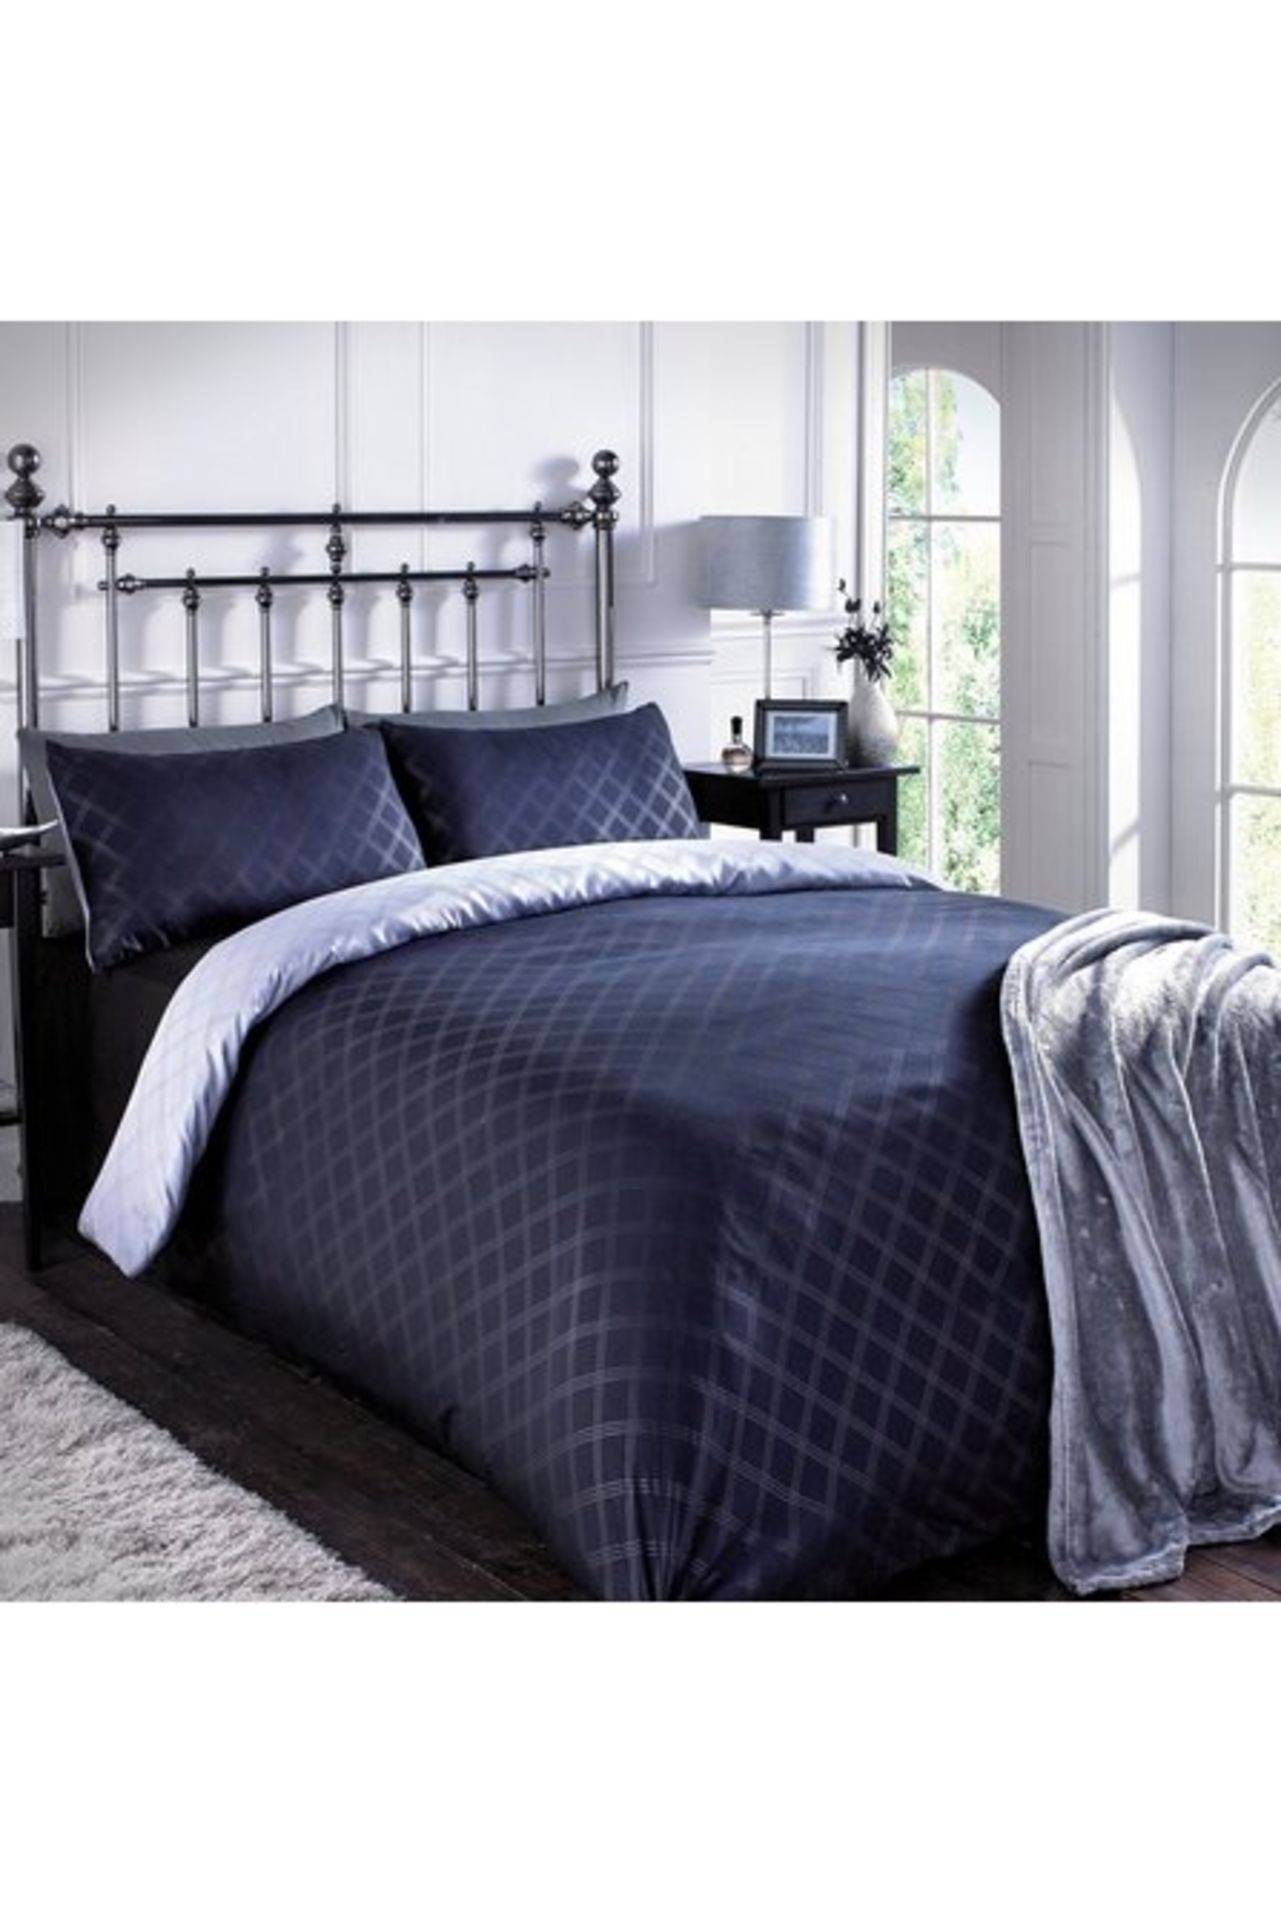 1 BAGGED LINDON CHECK DUVET SET IN BLACK/GREY / SIZE 135 X 200CM (PUBLIC VIEWING AVAILABLE)